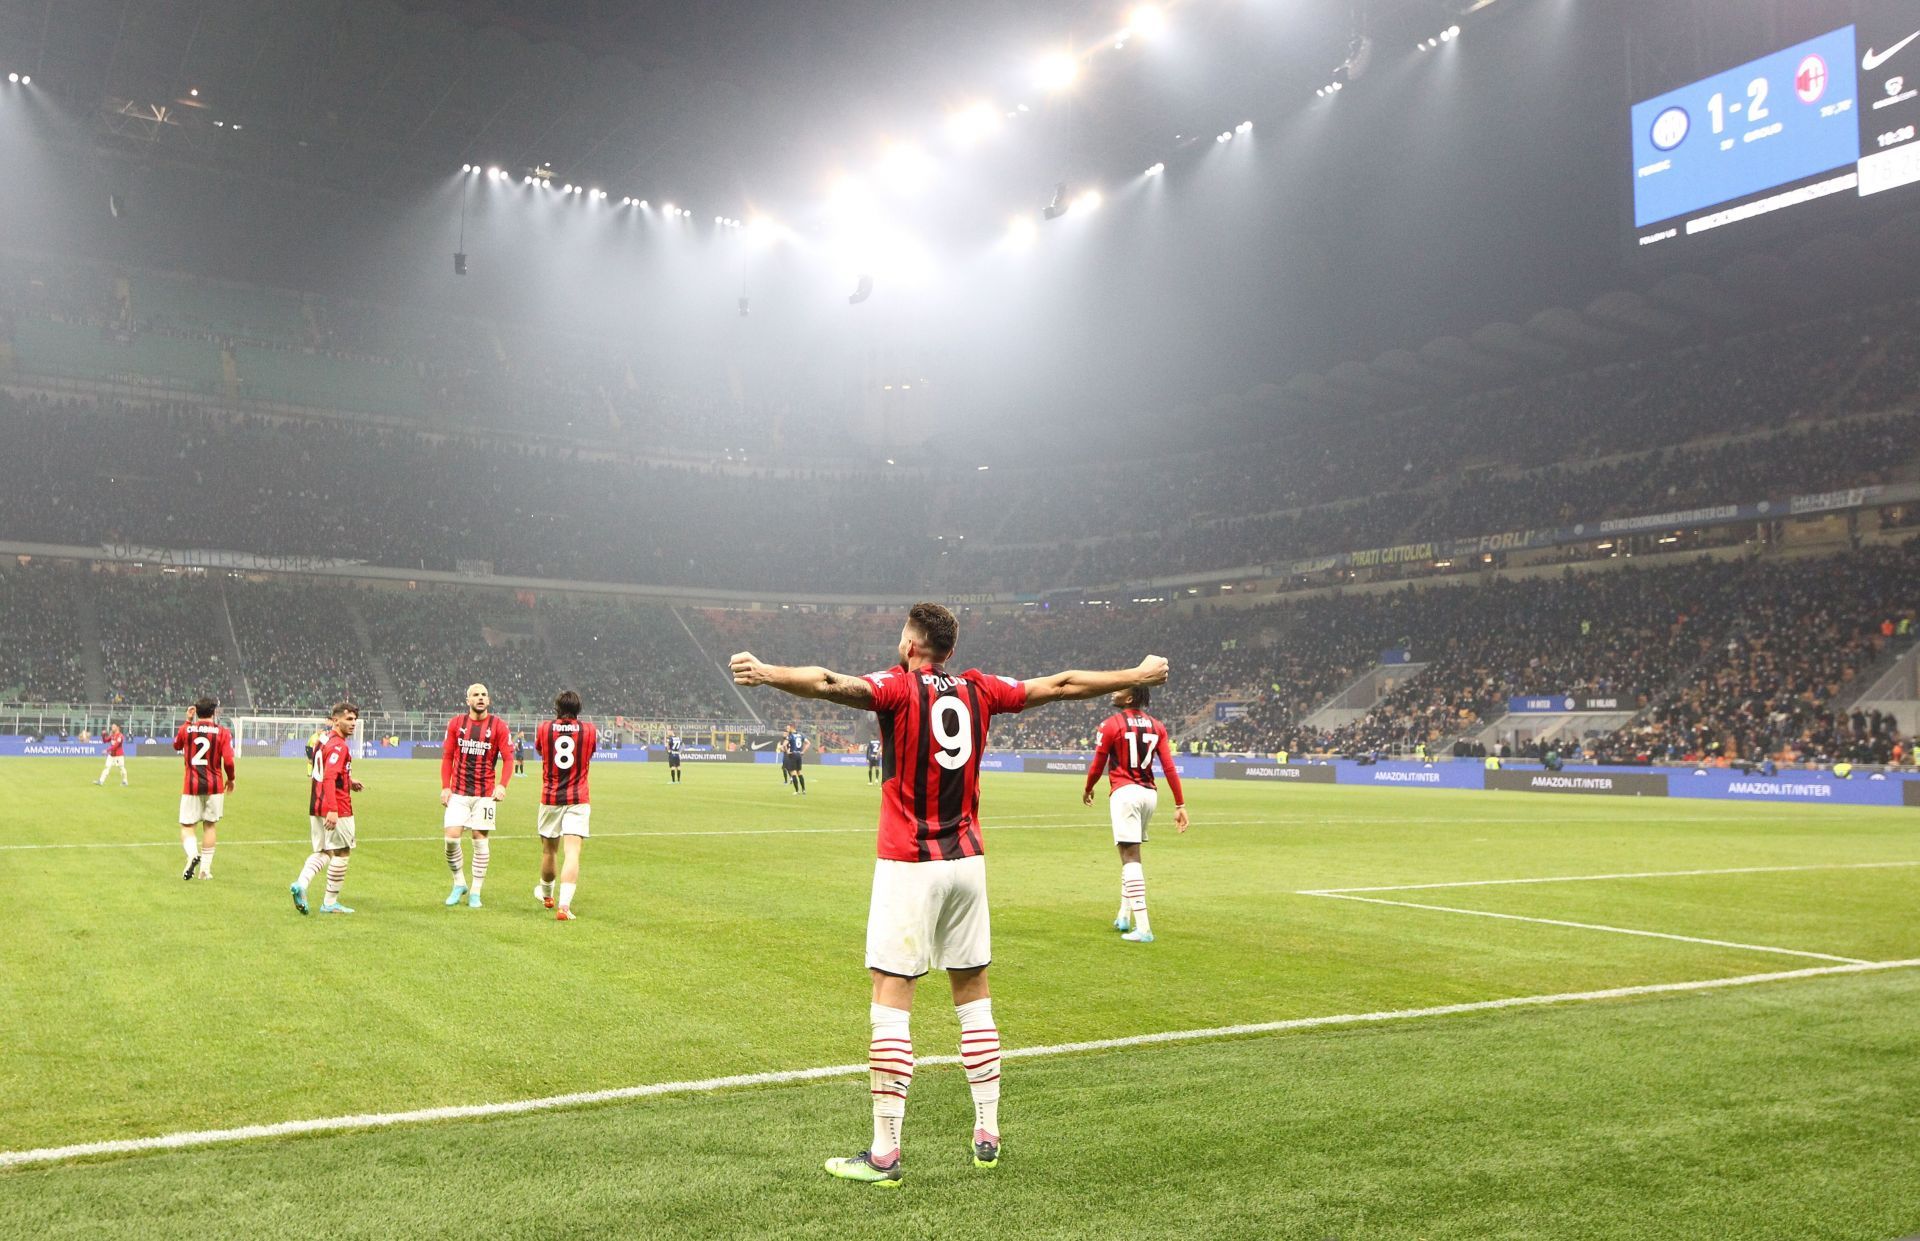 AC Milan and Inter Milan are the two top-scoring sides in the Italian top-flight